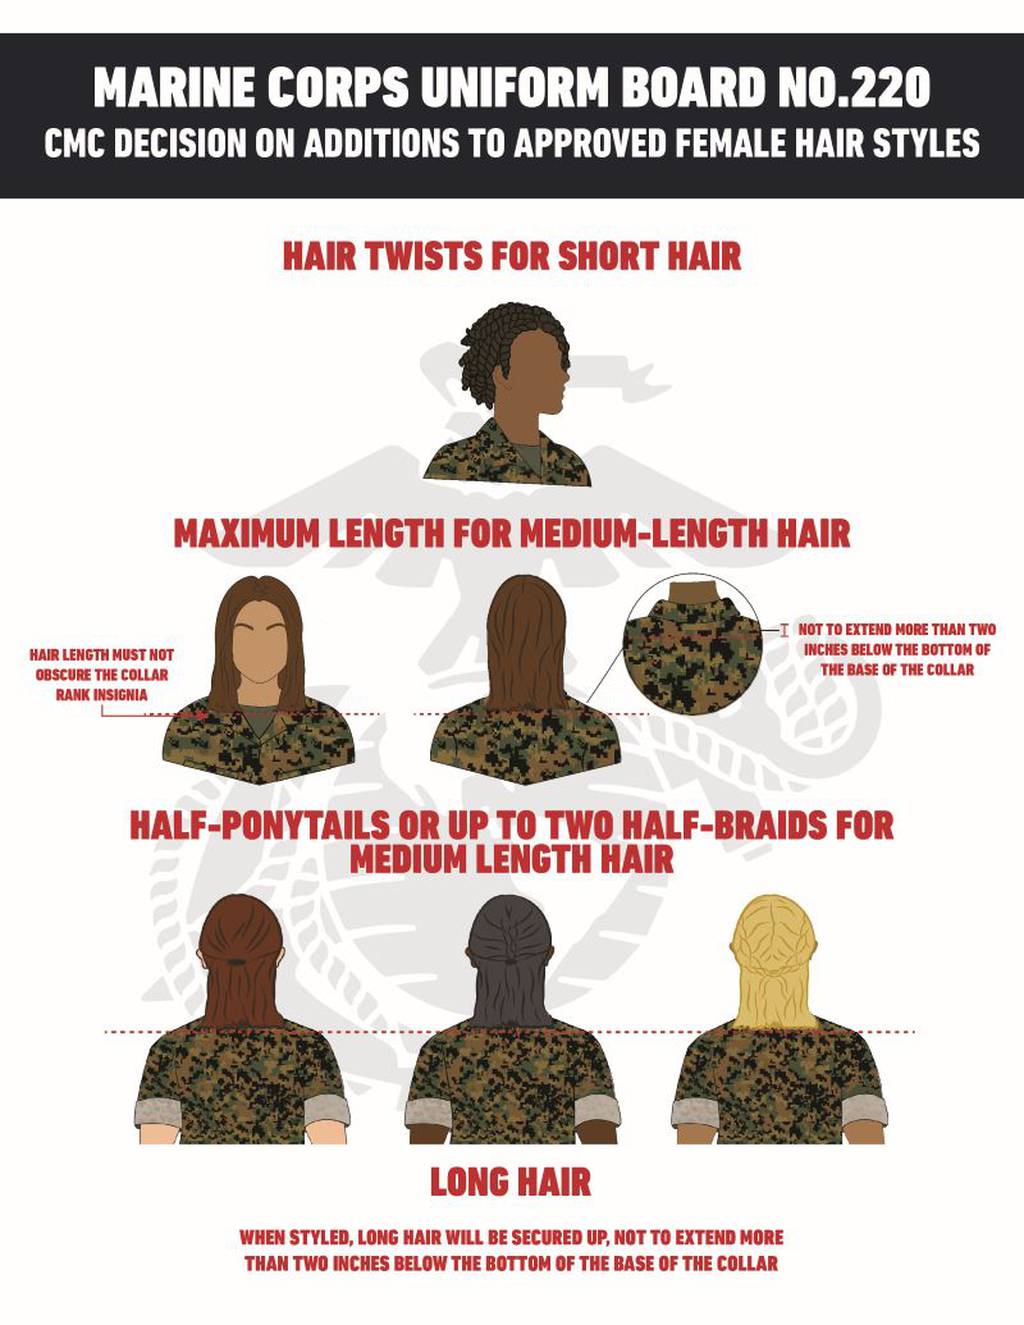 Marines Corps partially relaxes its strict hair rules for women